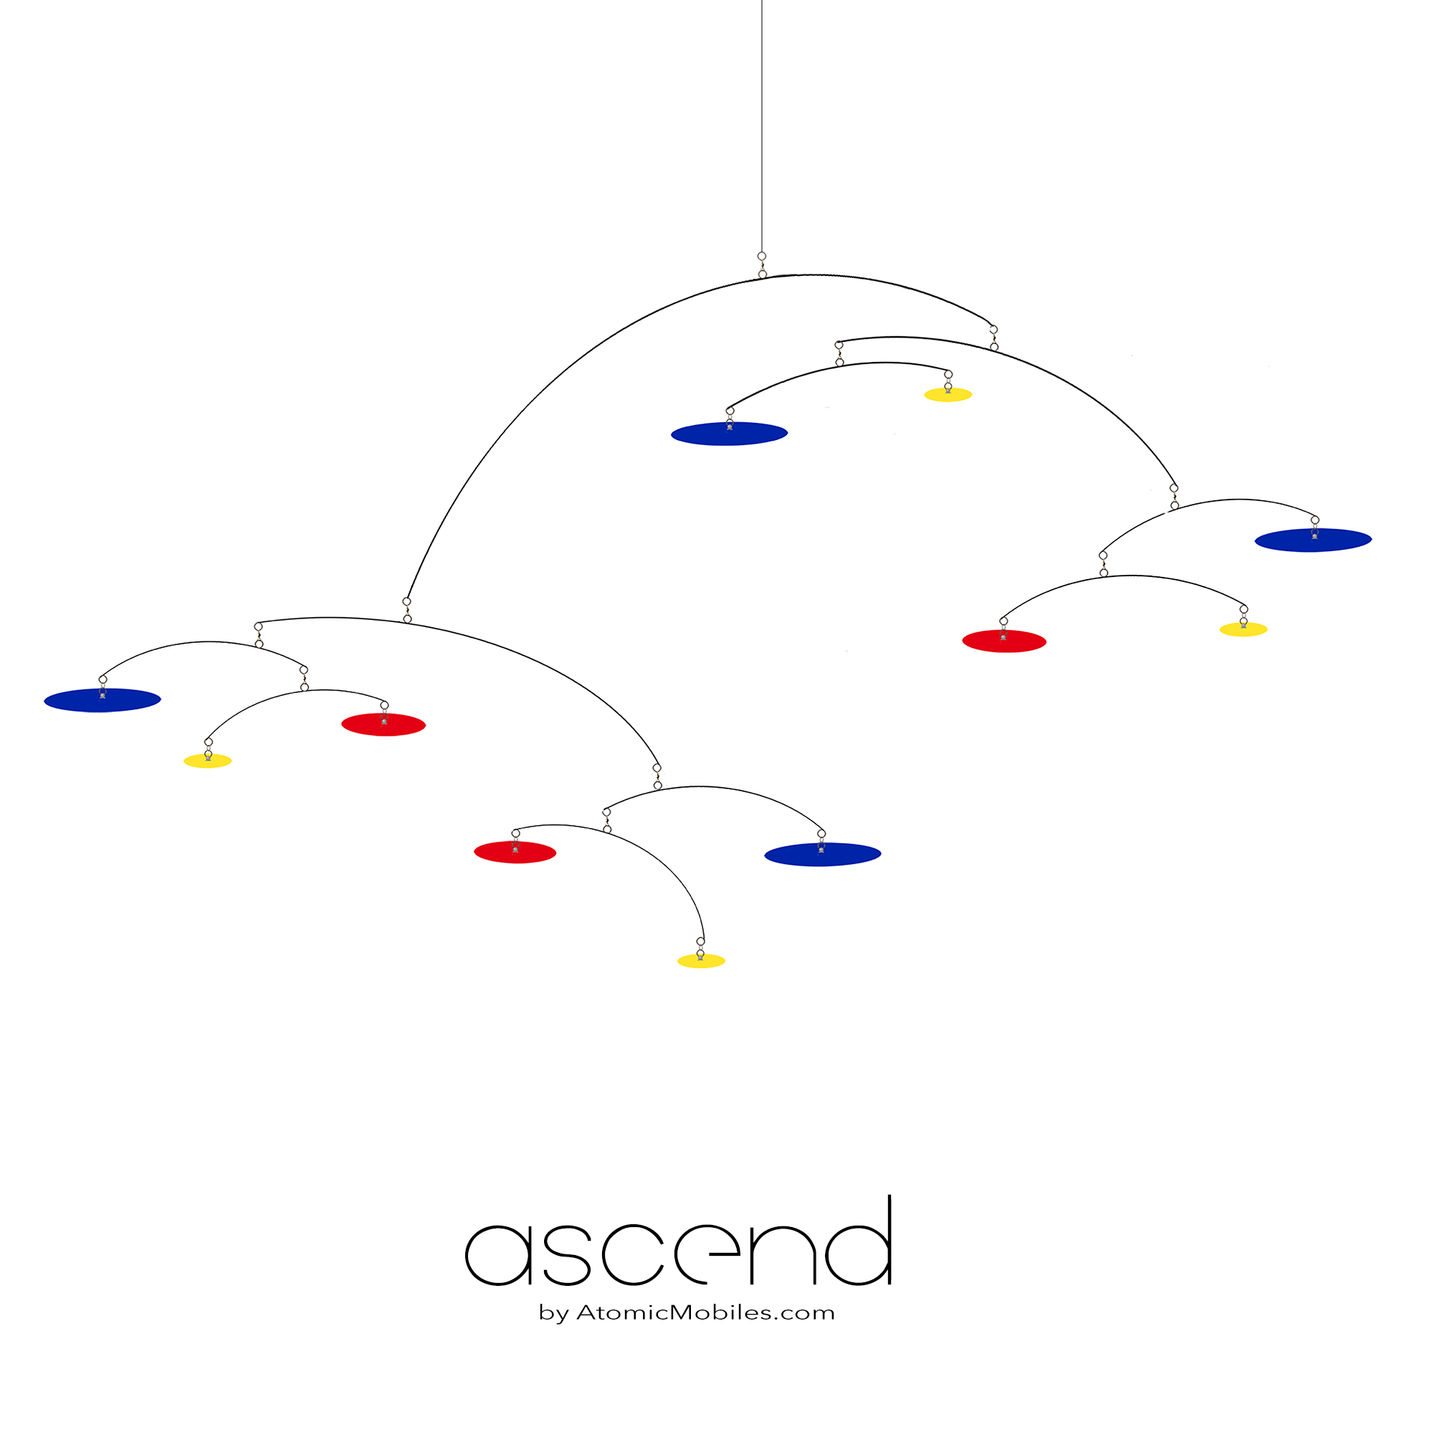 Ascend 8 foot XL hanging art mobile featuring horizontal geometric circles and 360 degree swiveling wire arms - mid century modern Calder-inspired mobile by AtomicMobiles.com